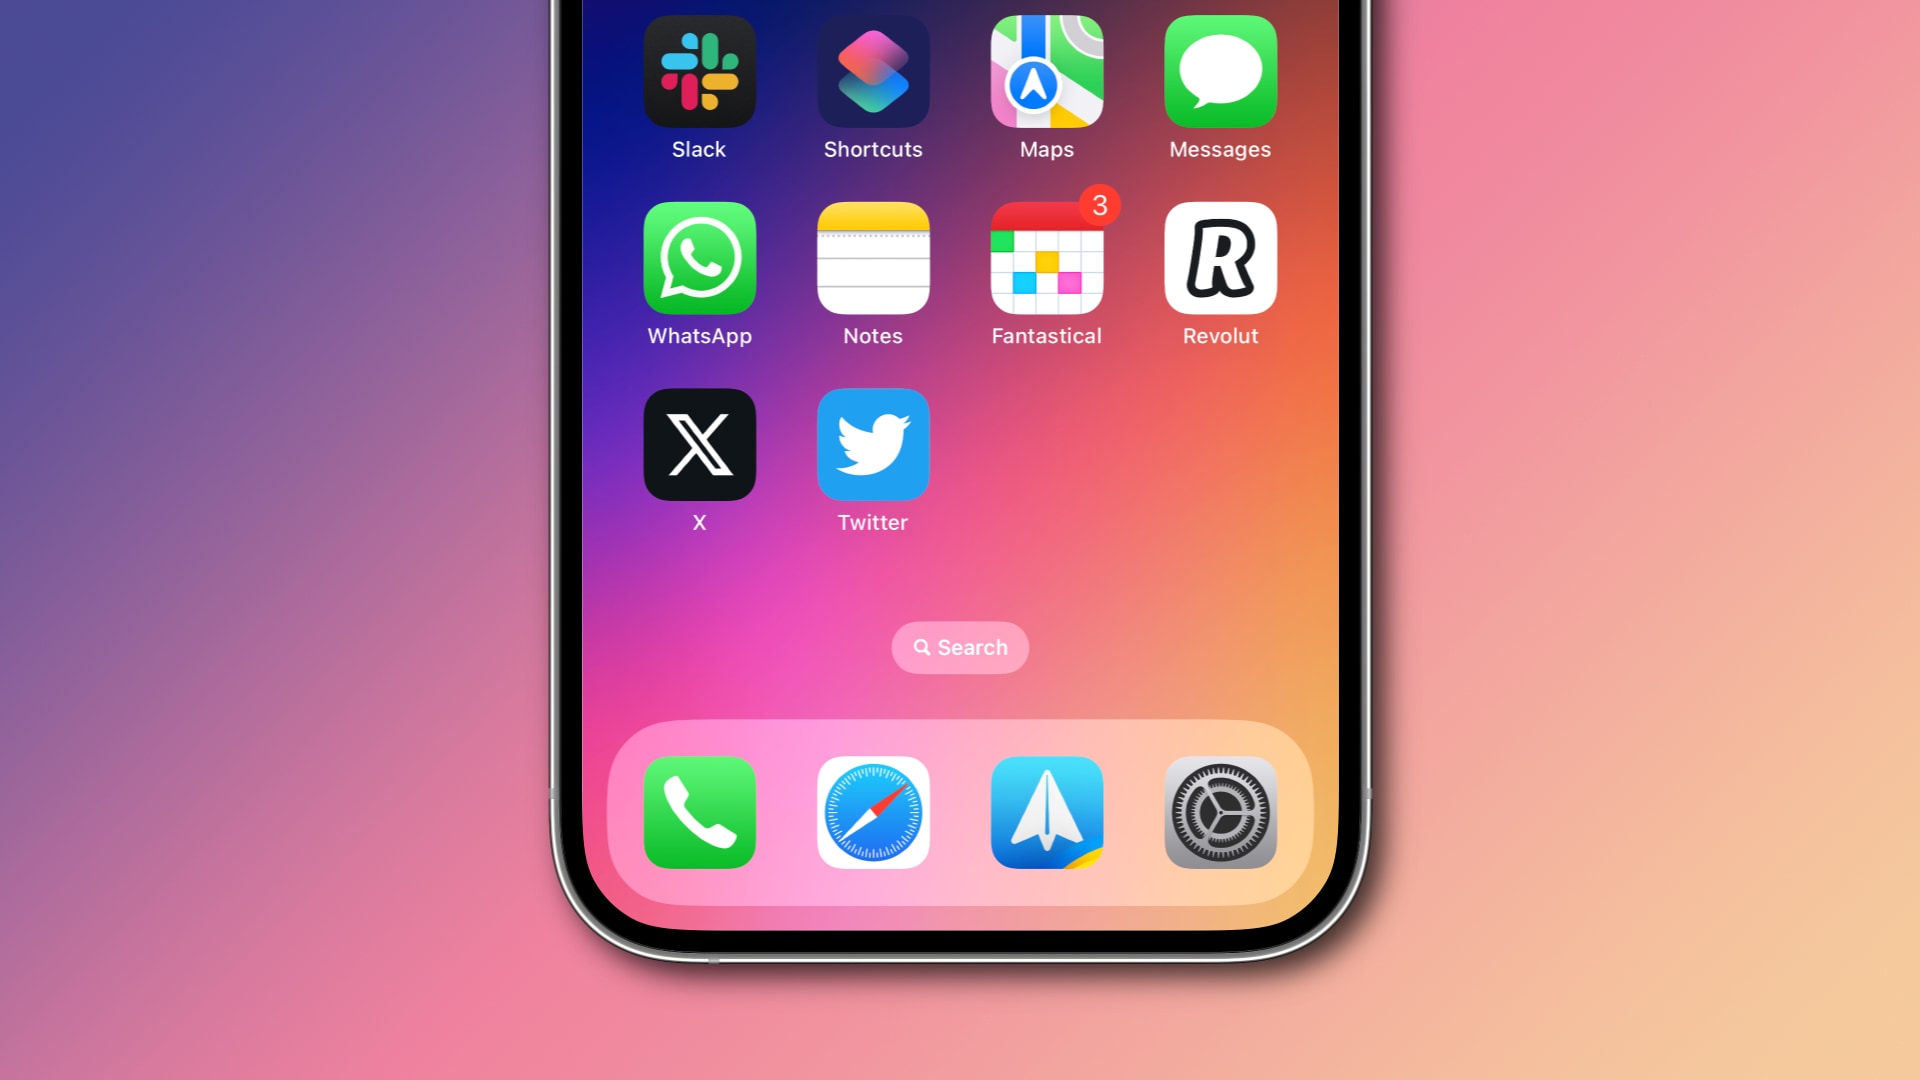 Twitter's old and new icons on iPhone Home Screen